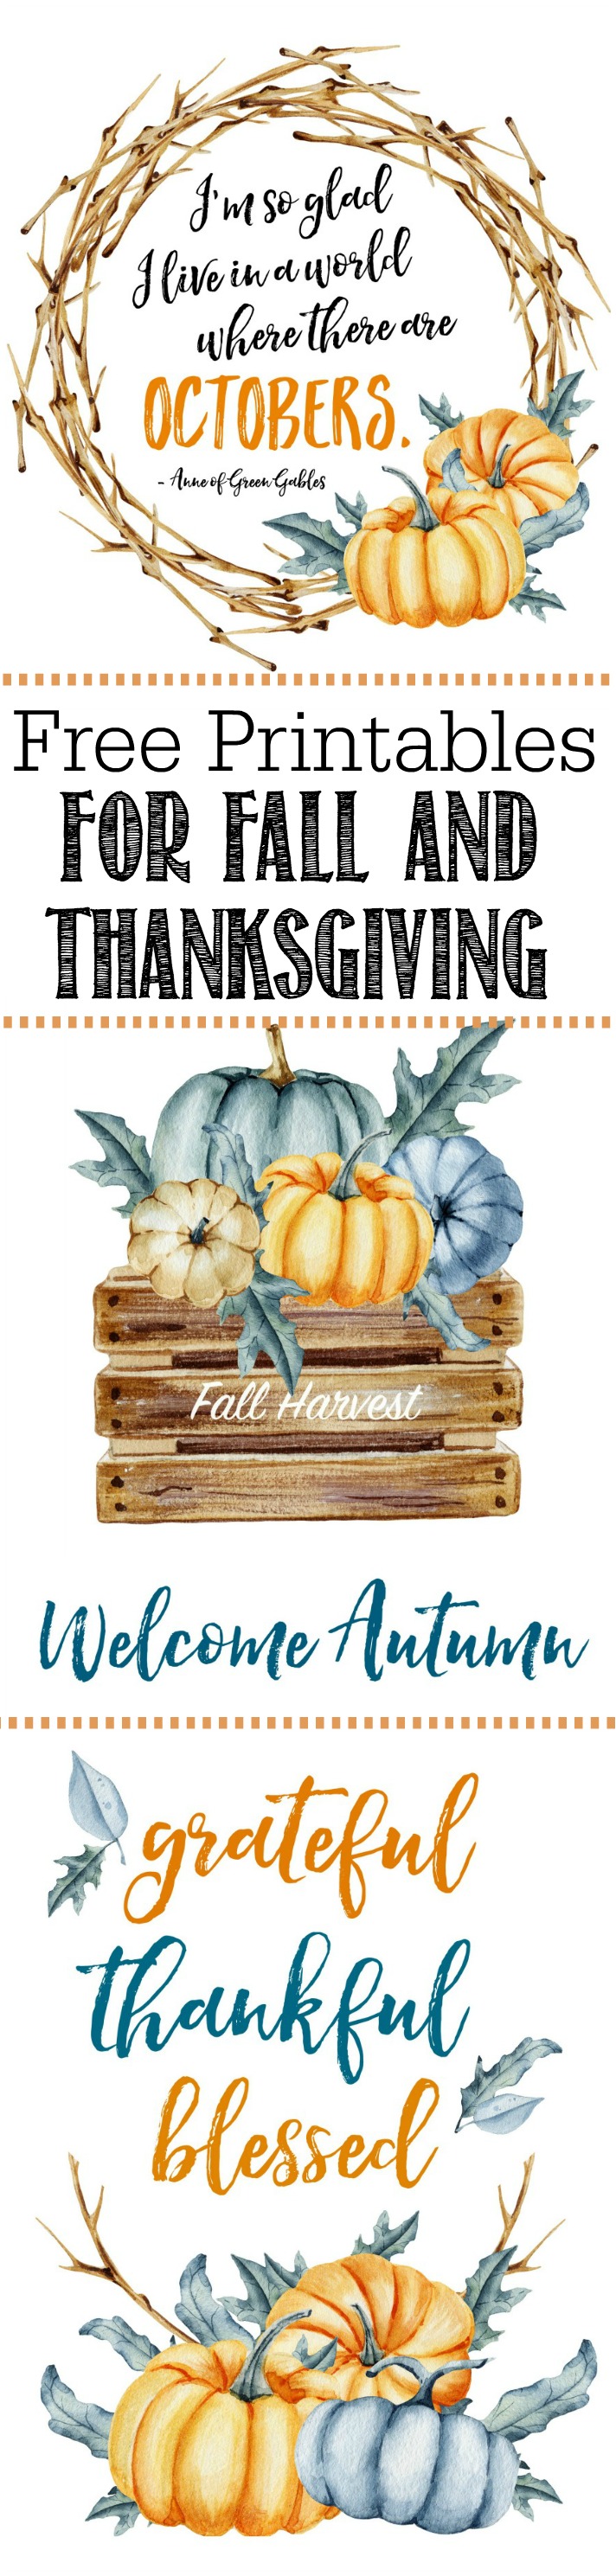 Cute free fall printables perfect for Thanksgiving or your fall decor!